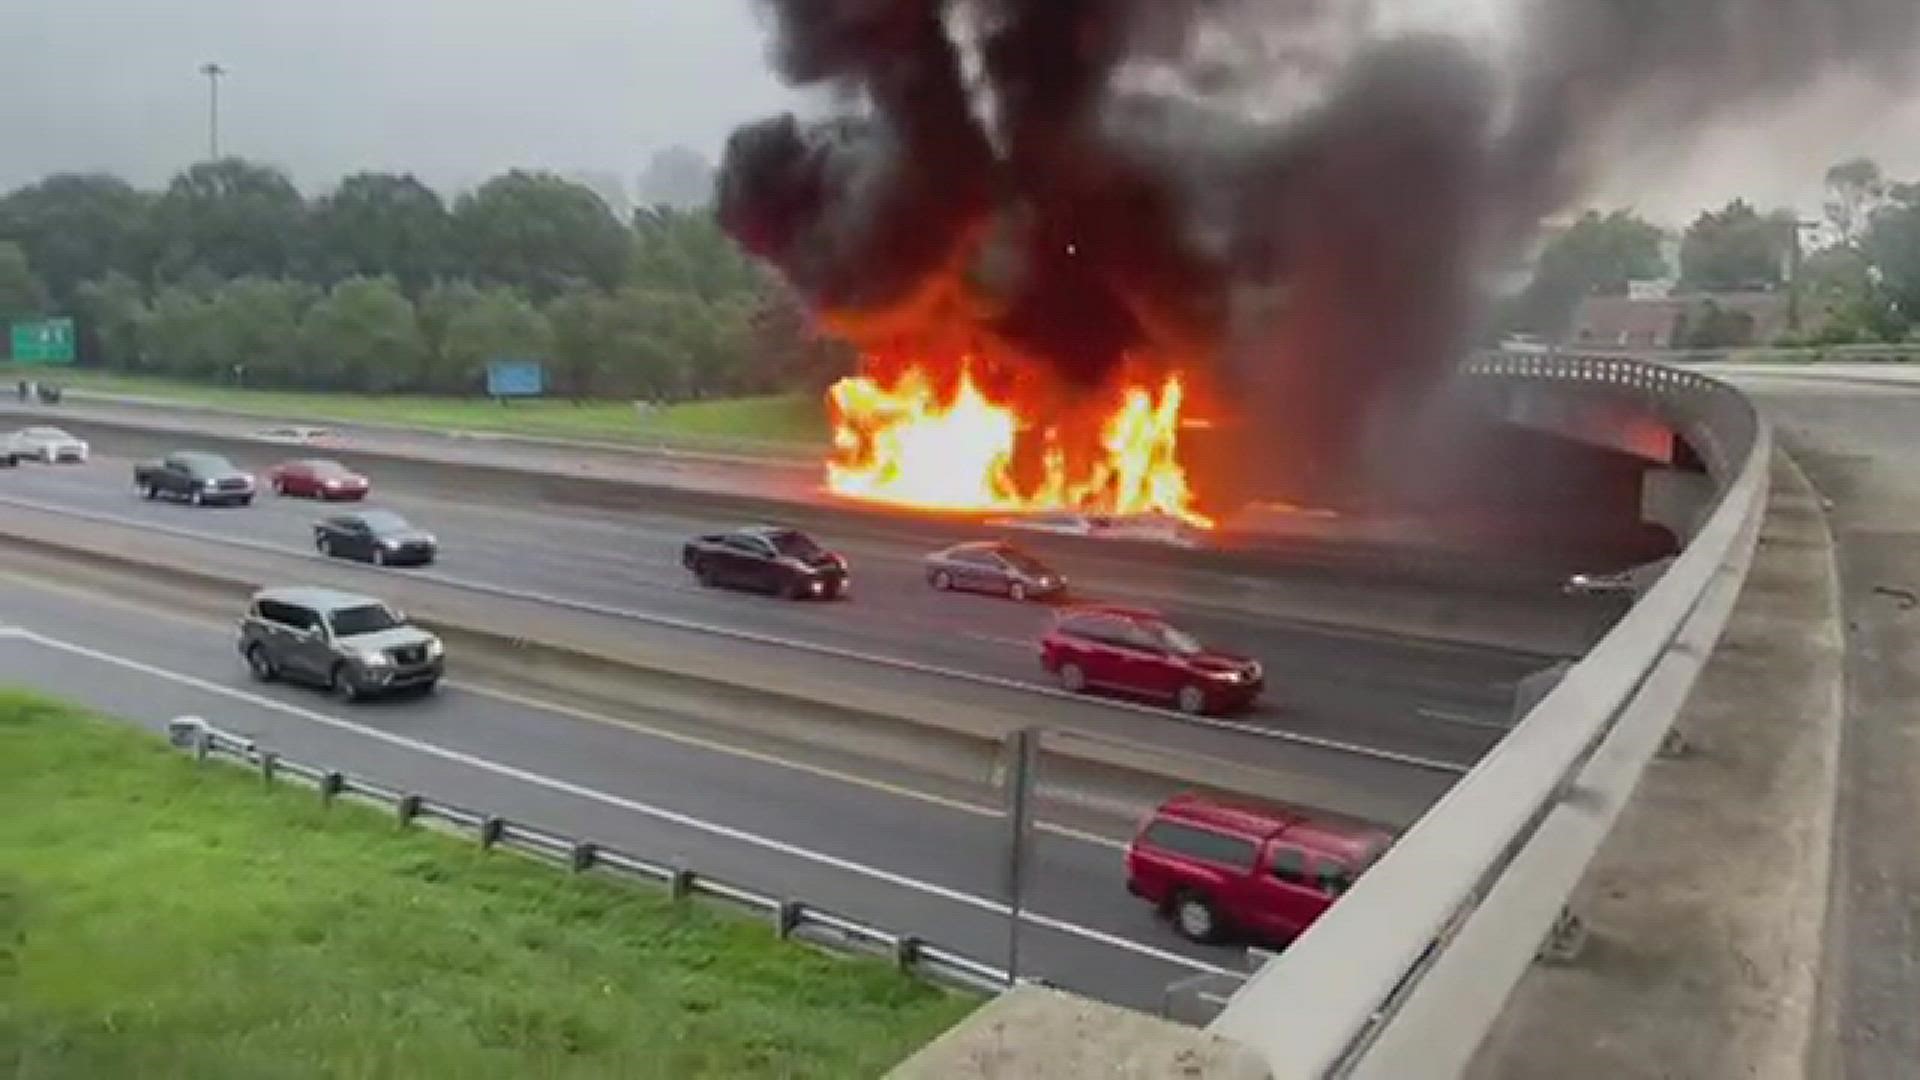 A tractor-trailer crashed and erupted into flames near the John Belk Freeway in Charlotte.